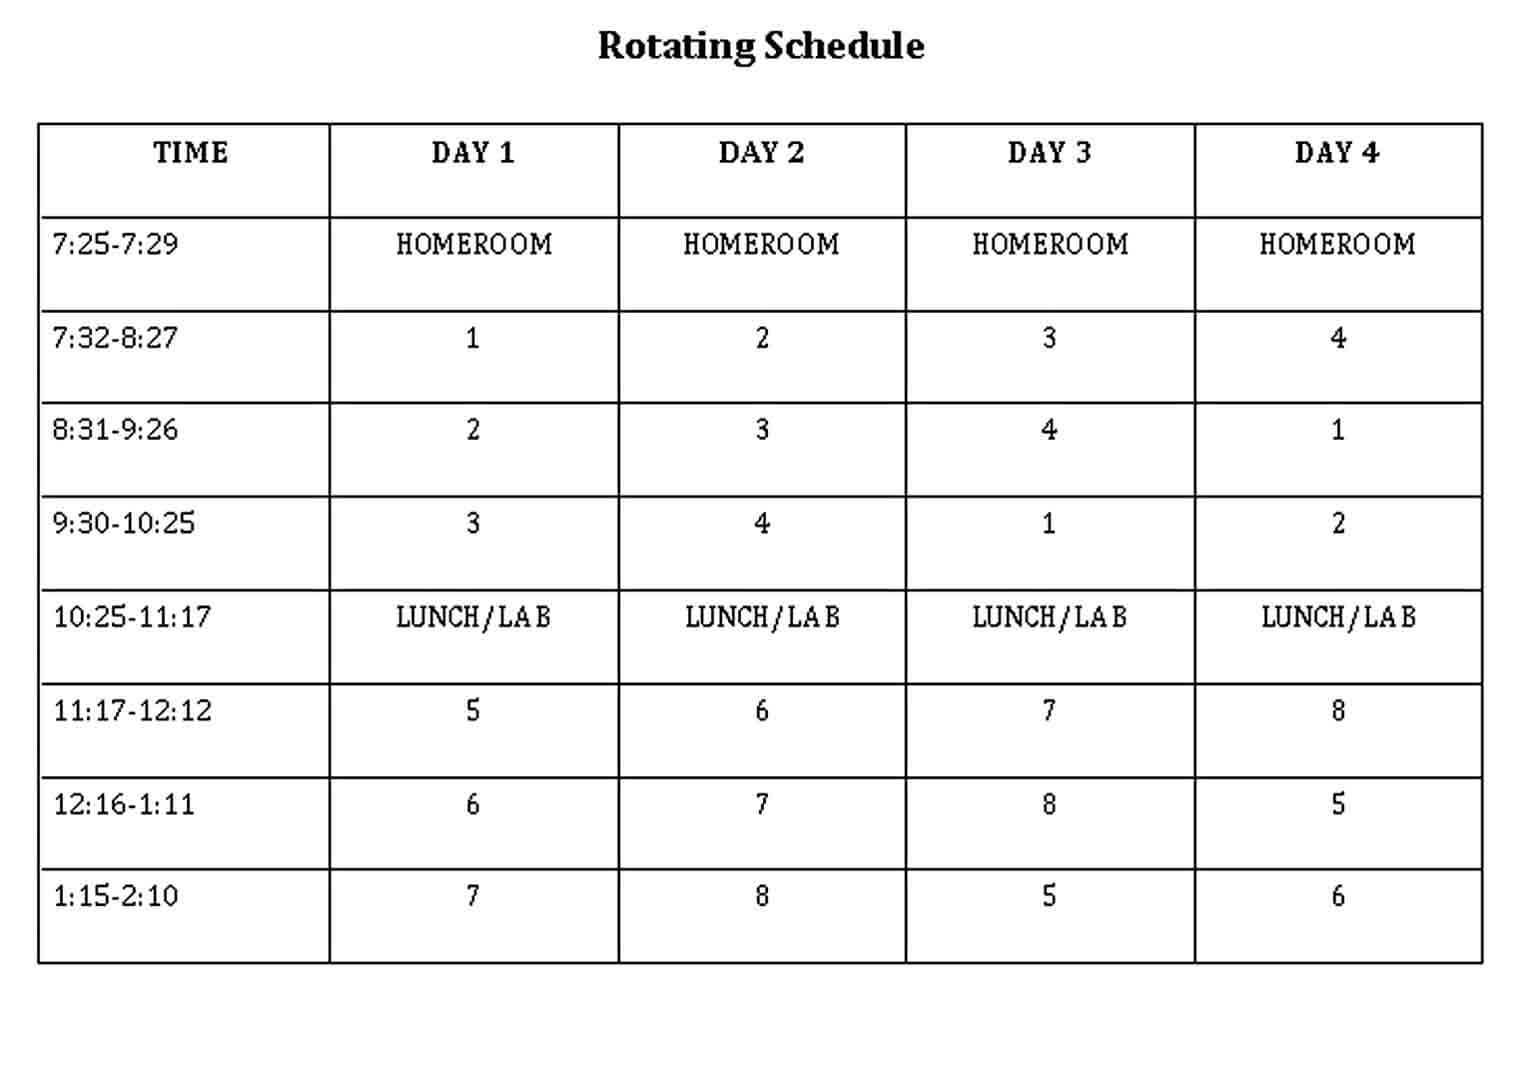 Rotating Day Schedule